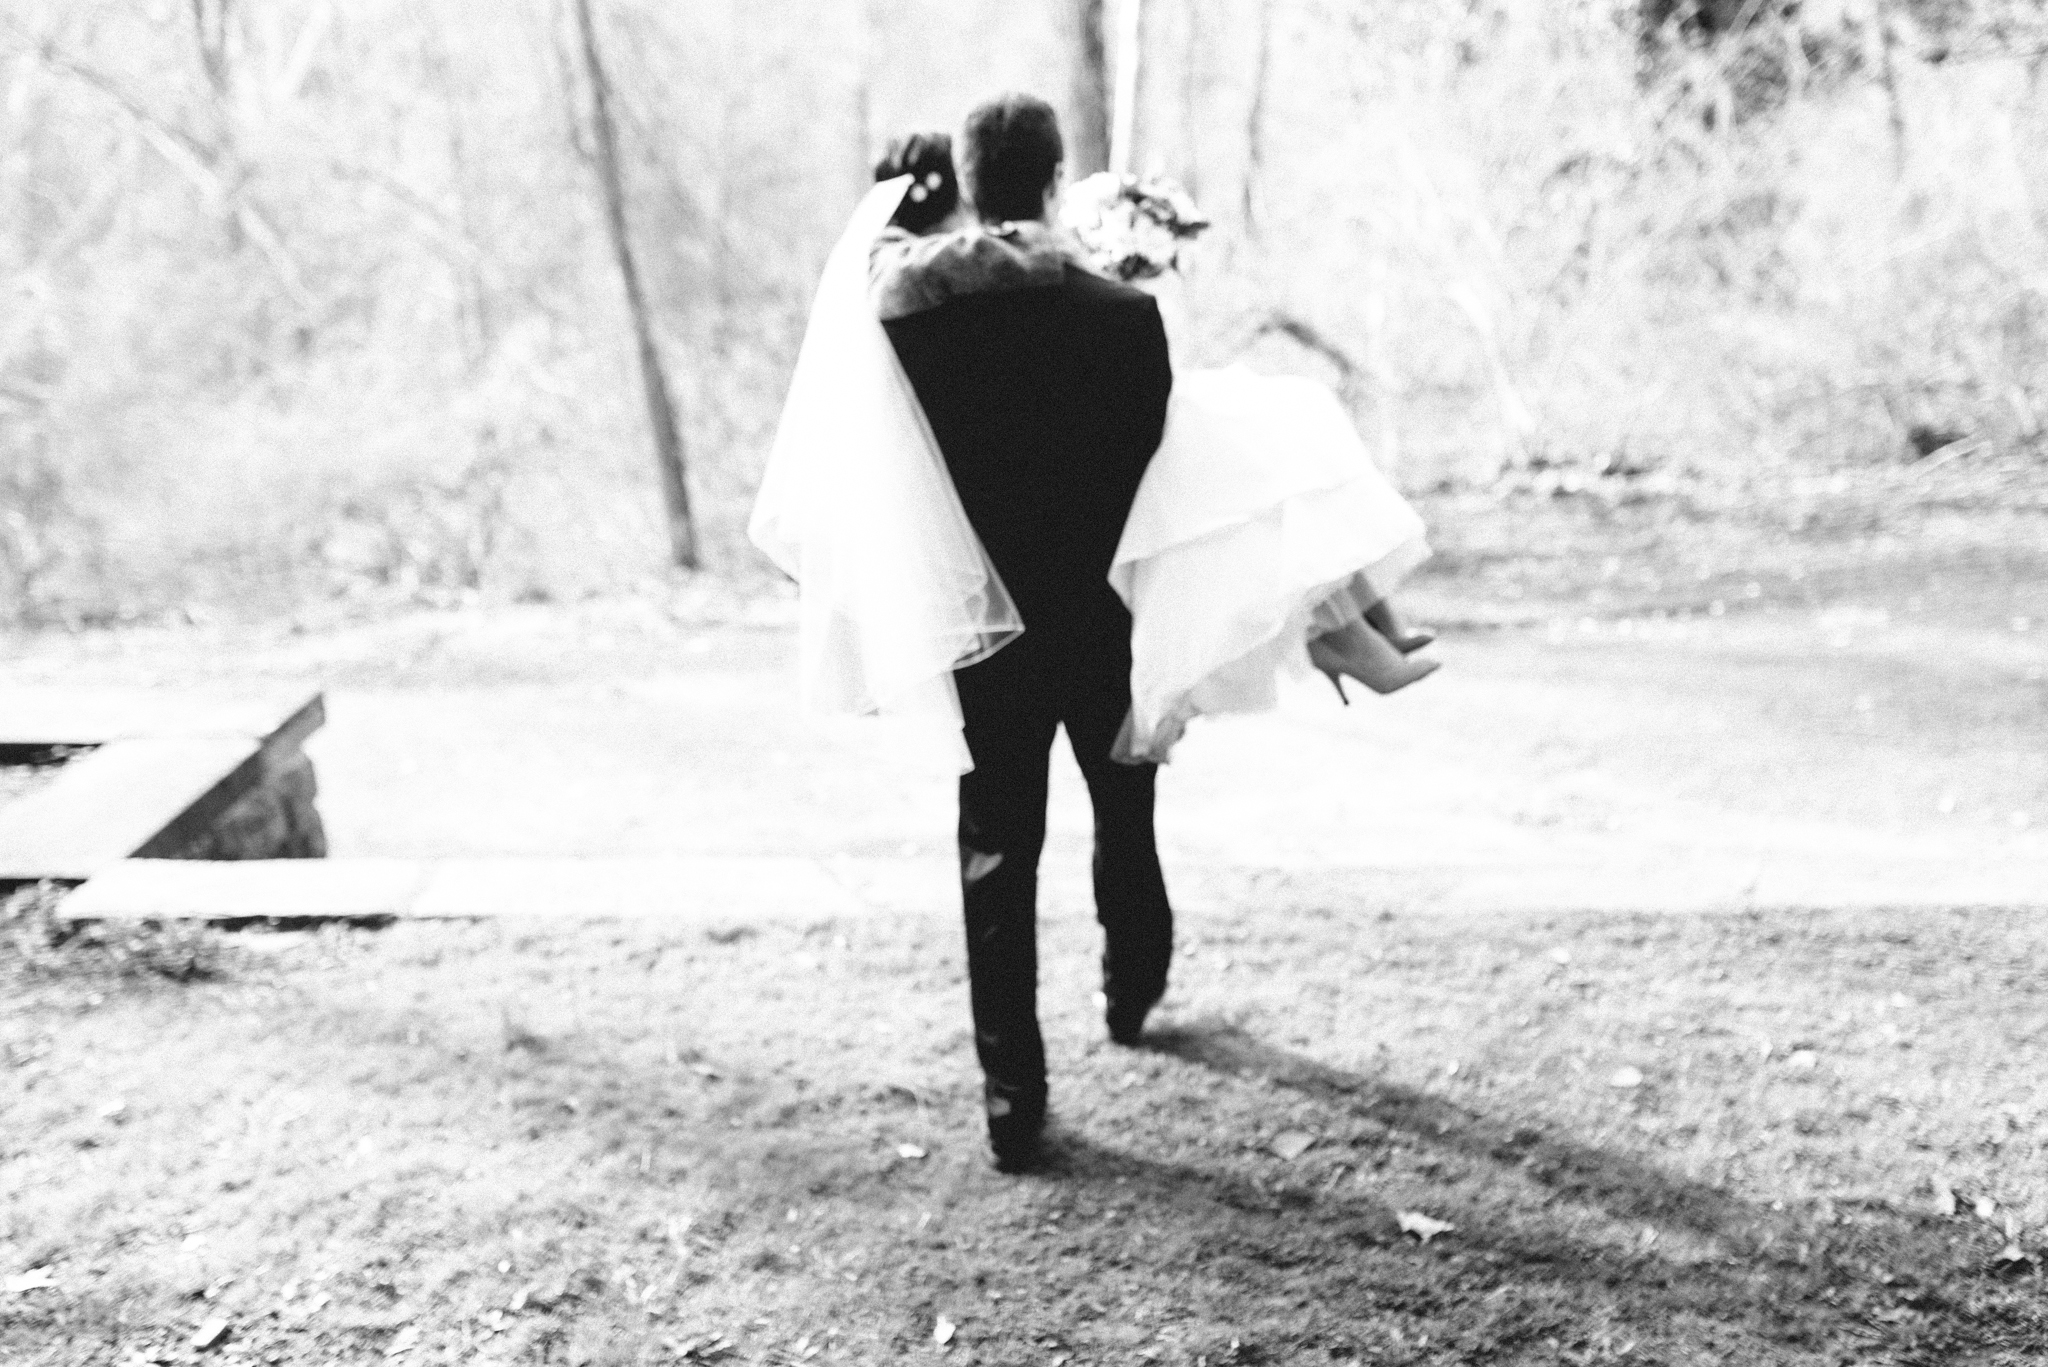 Maralize + Jesse - Ridley Creek State Park Anniversary Session - Alison Dunn Photography photo-19